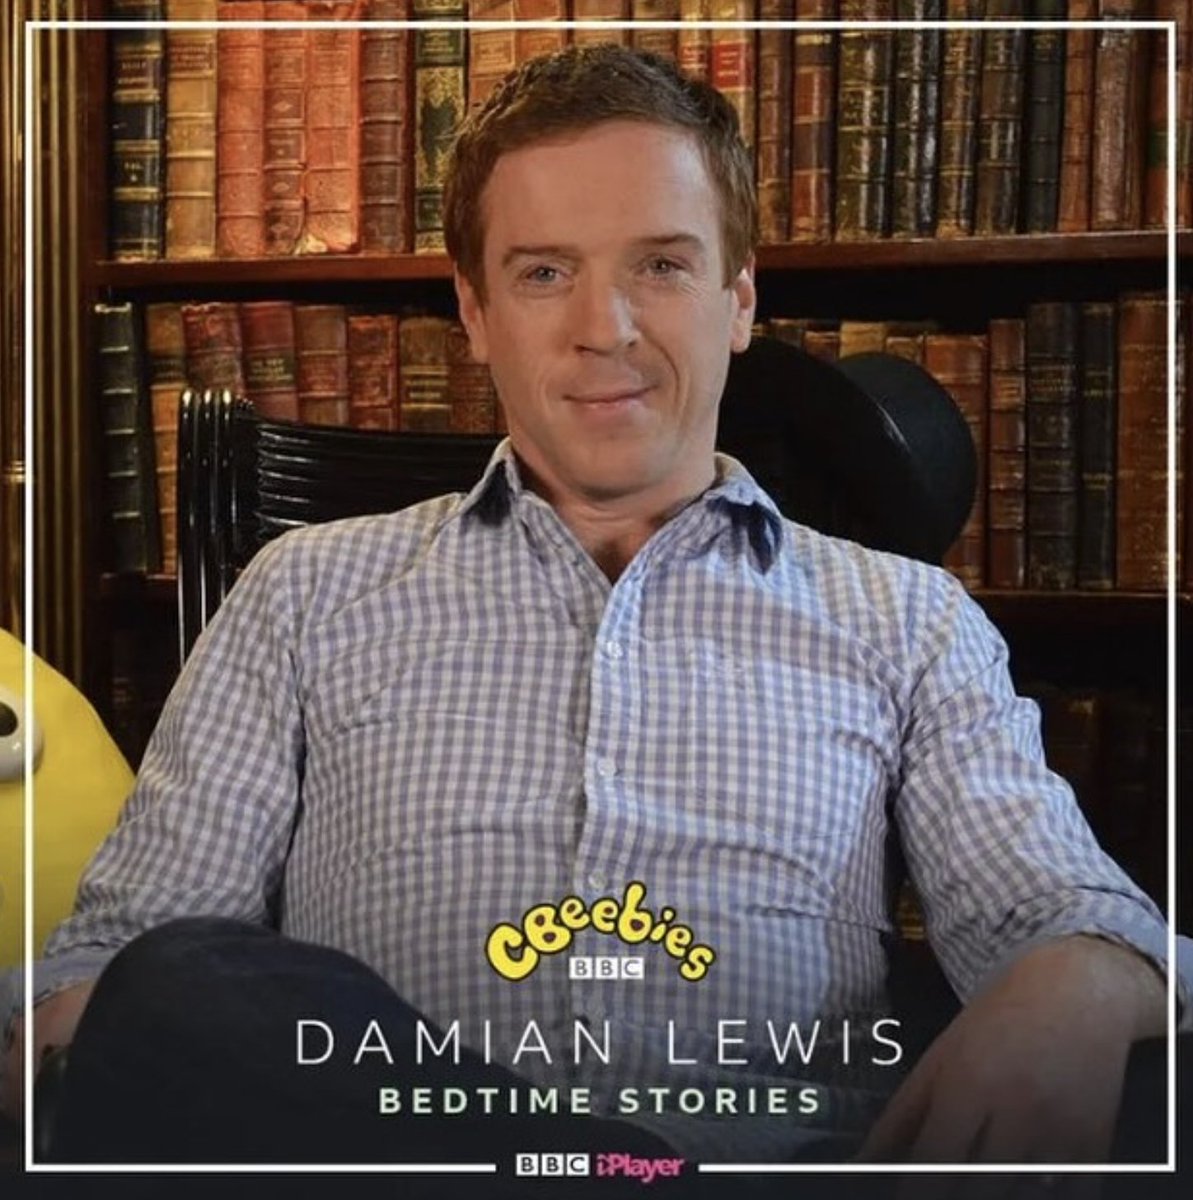 Bedtime stories with Damian Lewis 💕 HURRY before HURRY before videos disappear off of YouTube. Let Damian Lewis read you and your little ones 4 bedtime stories. Rare that these are available. GET IN NOW: damian-lewis.com/2014/01/01/219… #DamianLewis